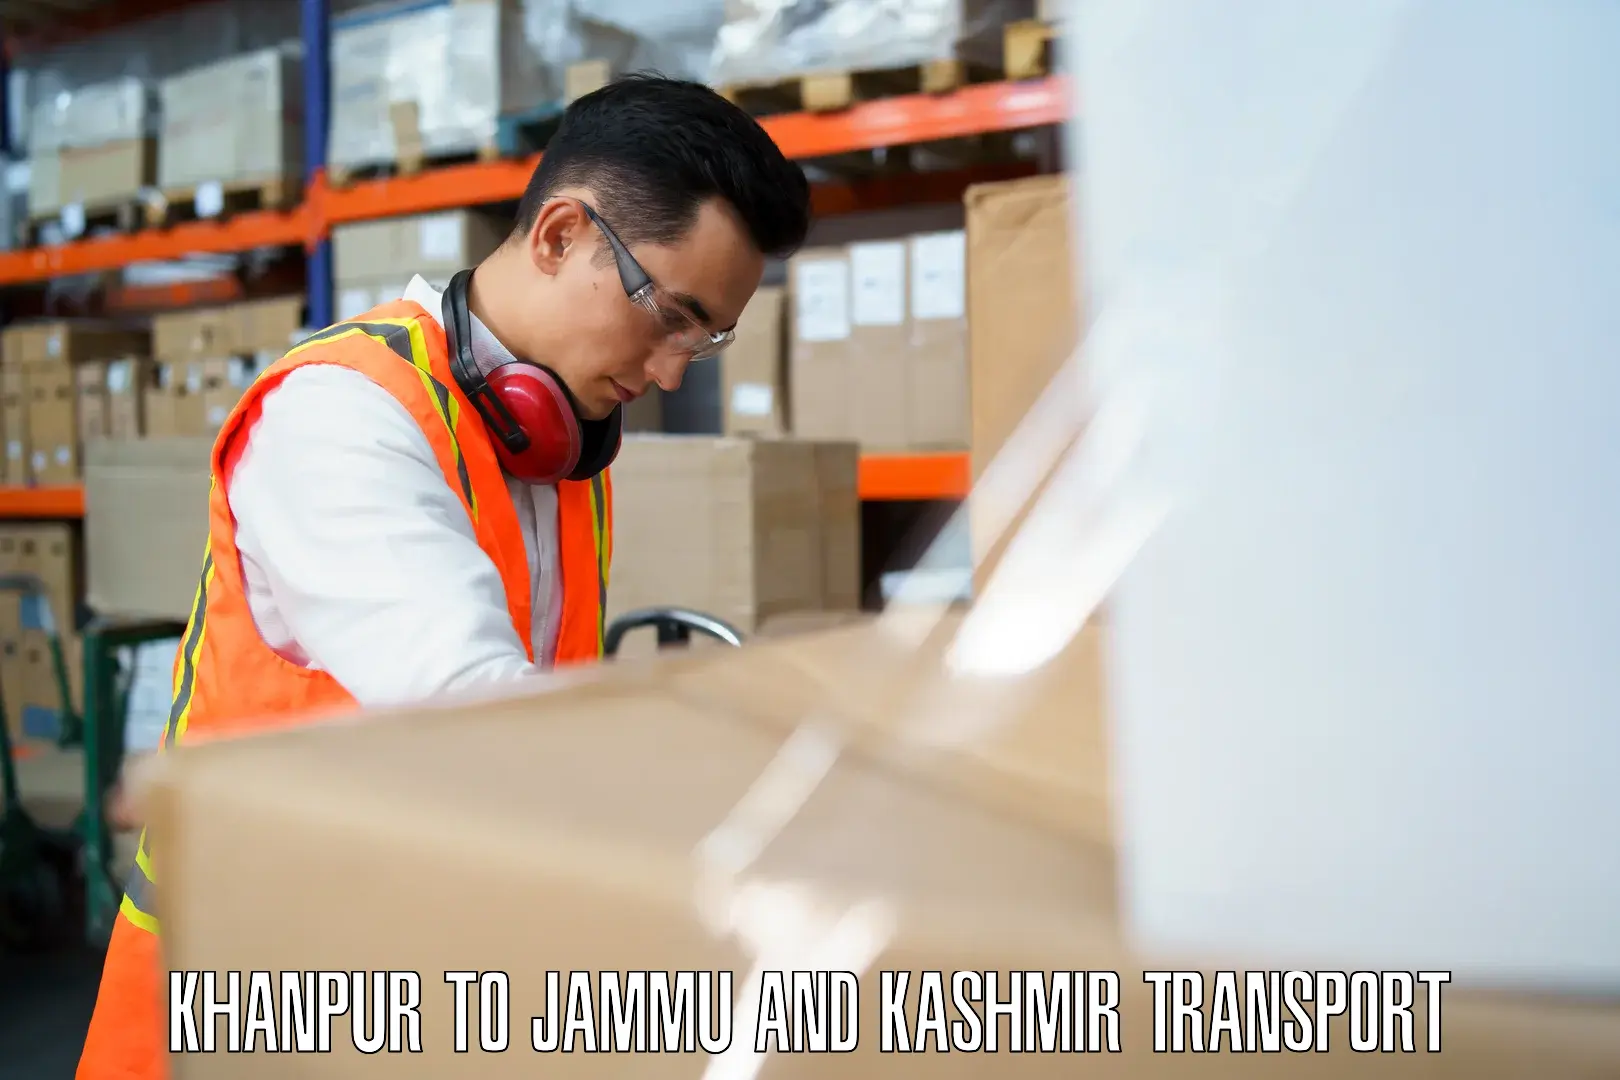 Container transport service Khanpur to Jammu and Kashmir